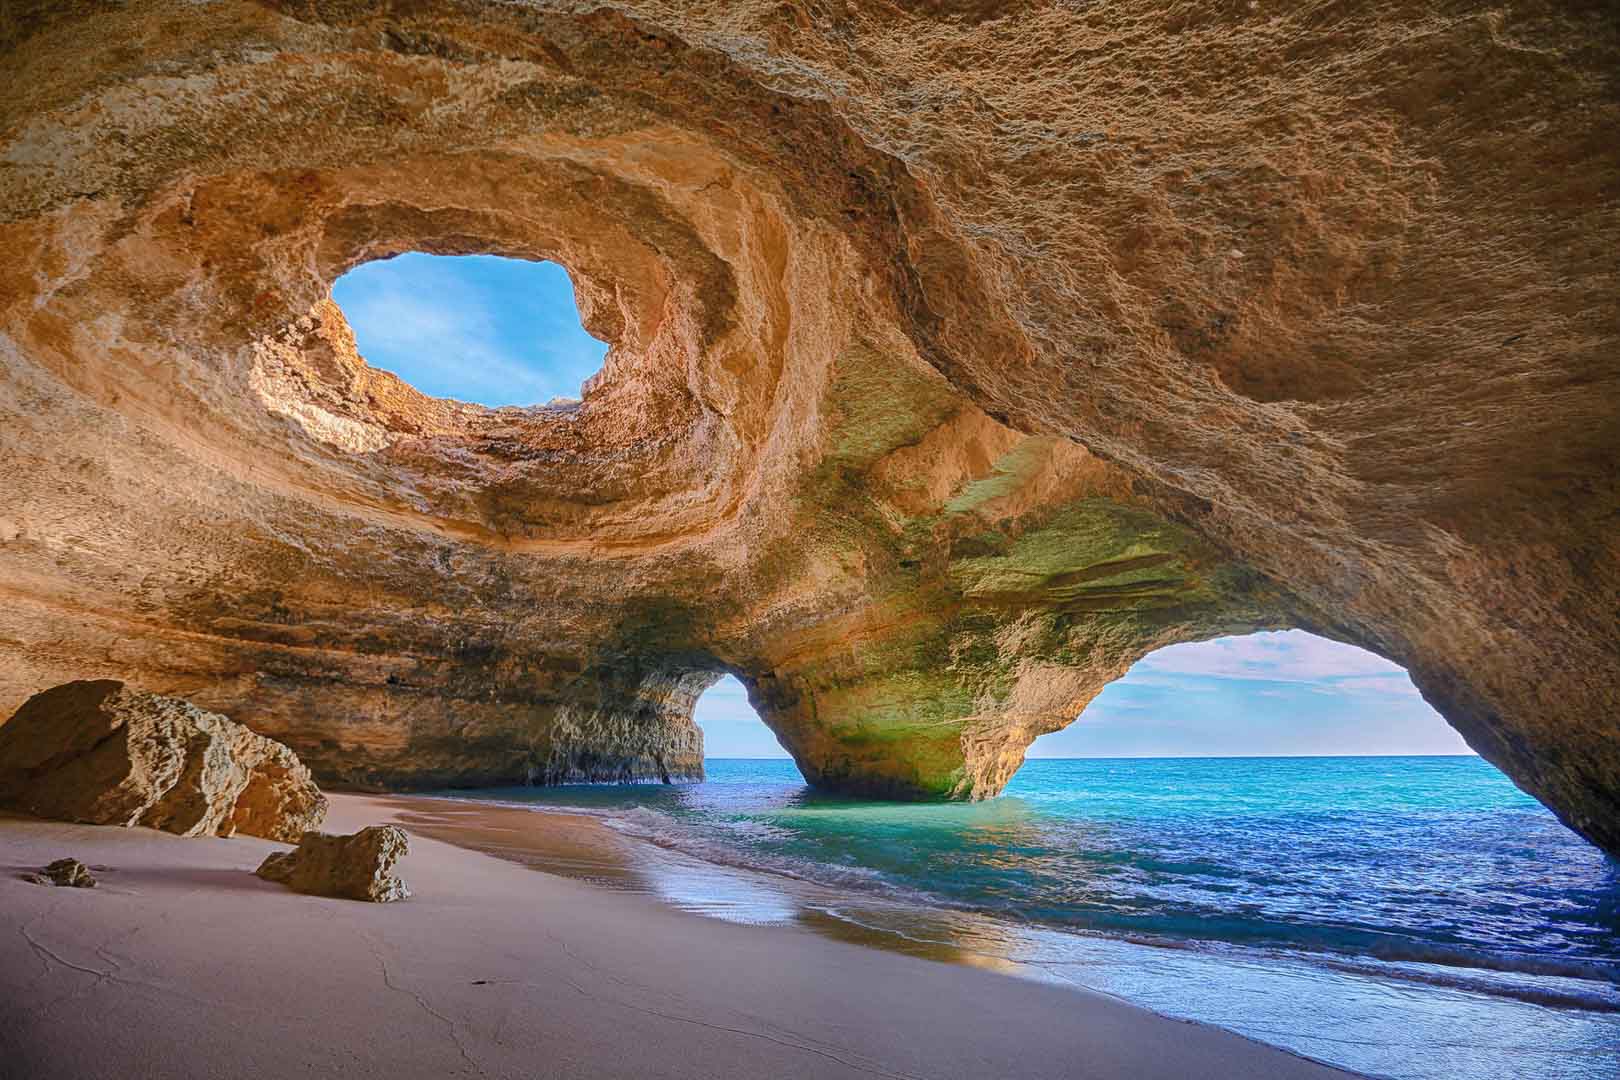 benagil cave is in the famous landmarks of portugal